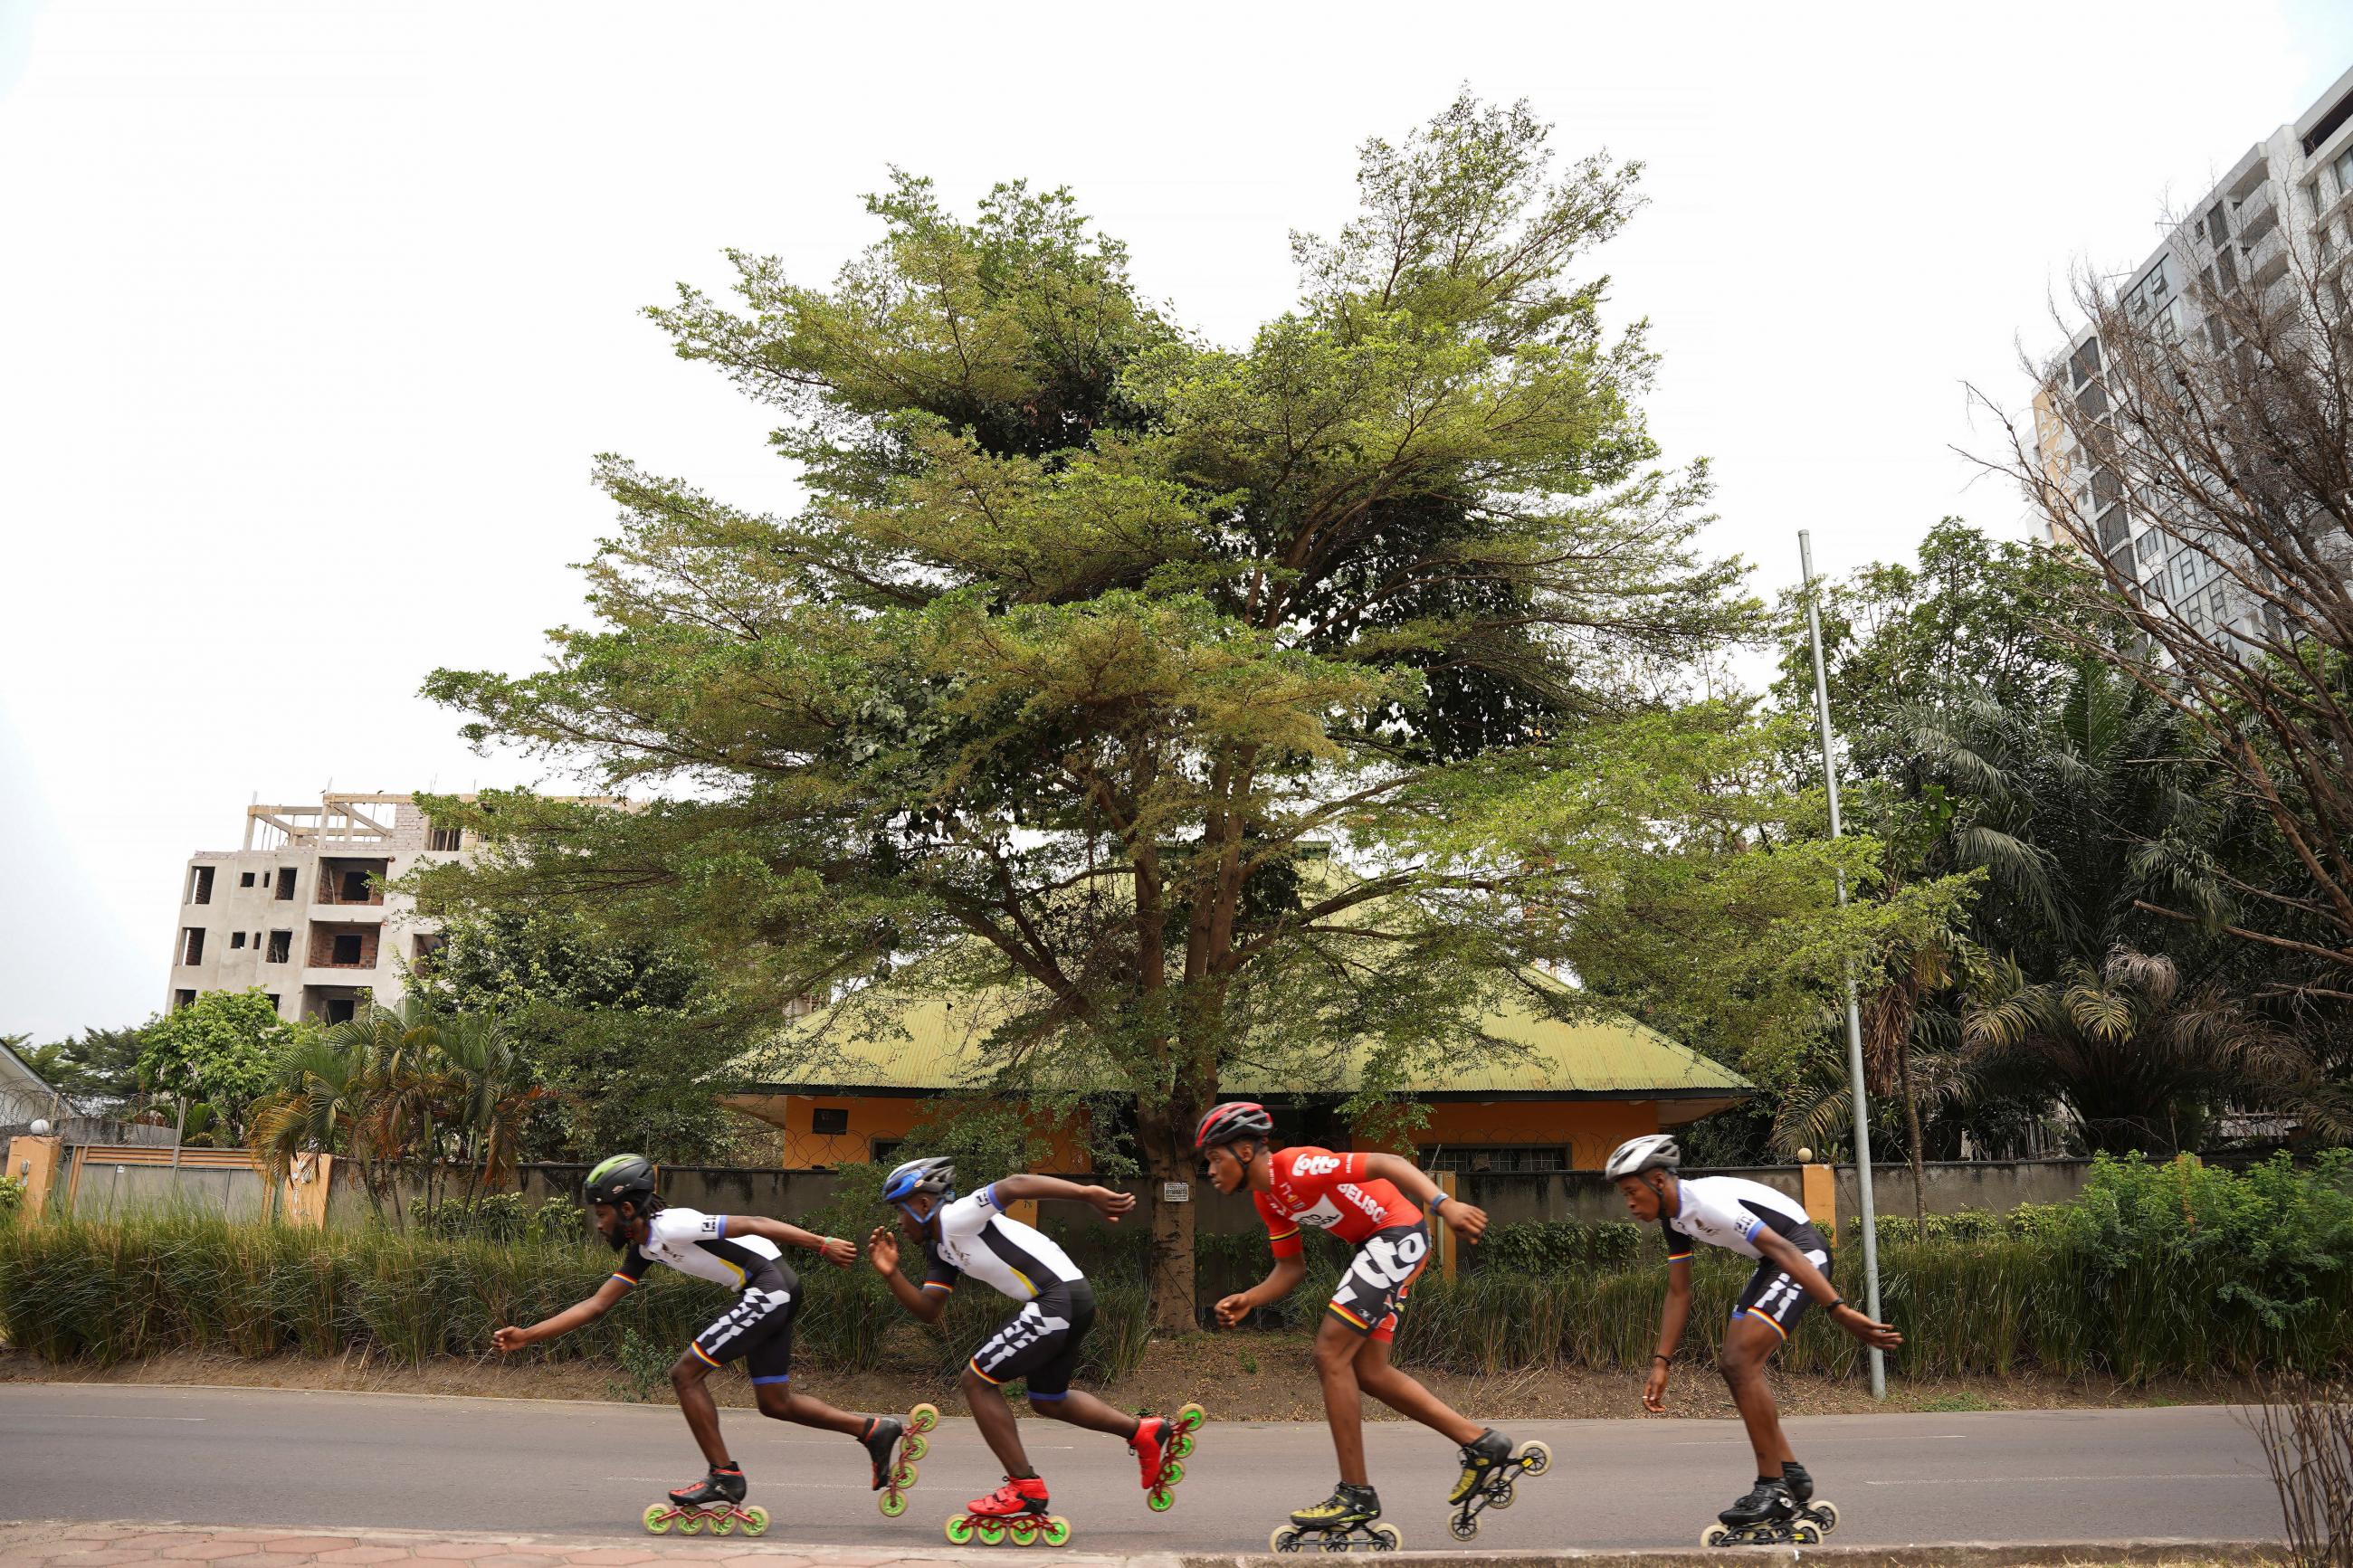 Serge Makolo leads his team of four speed skaters past a large green treeduring a training in Kinshasa, Democratic Republic of Congo, on September 16, 2021. 